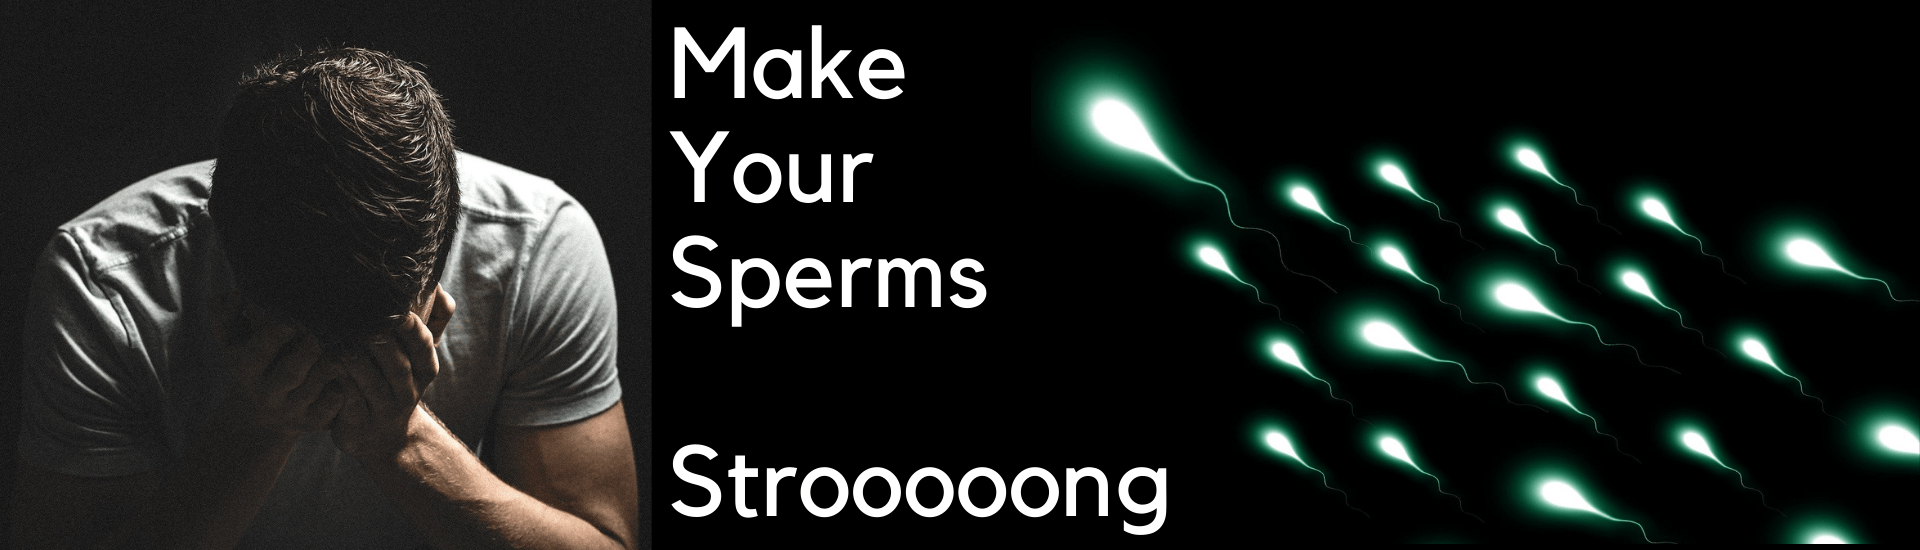 make sperms too stroong